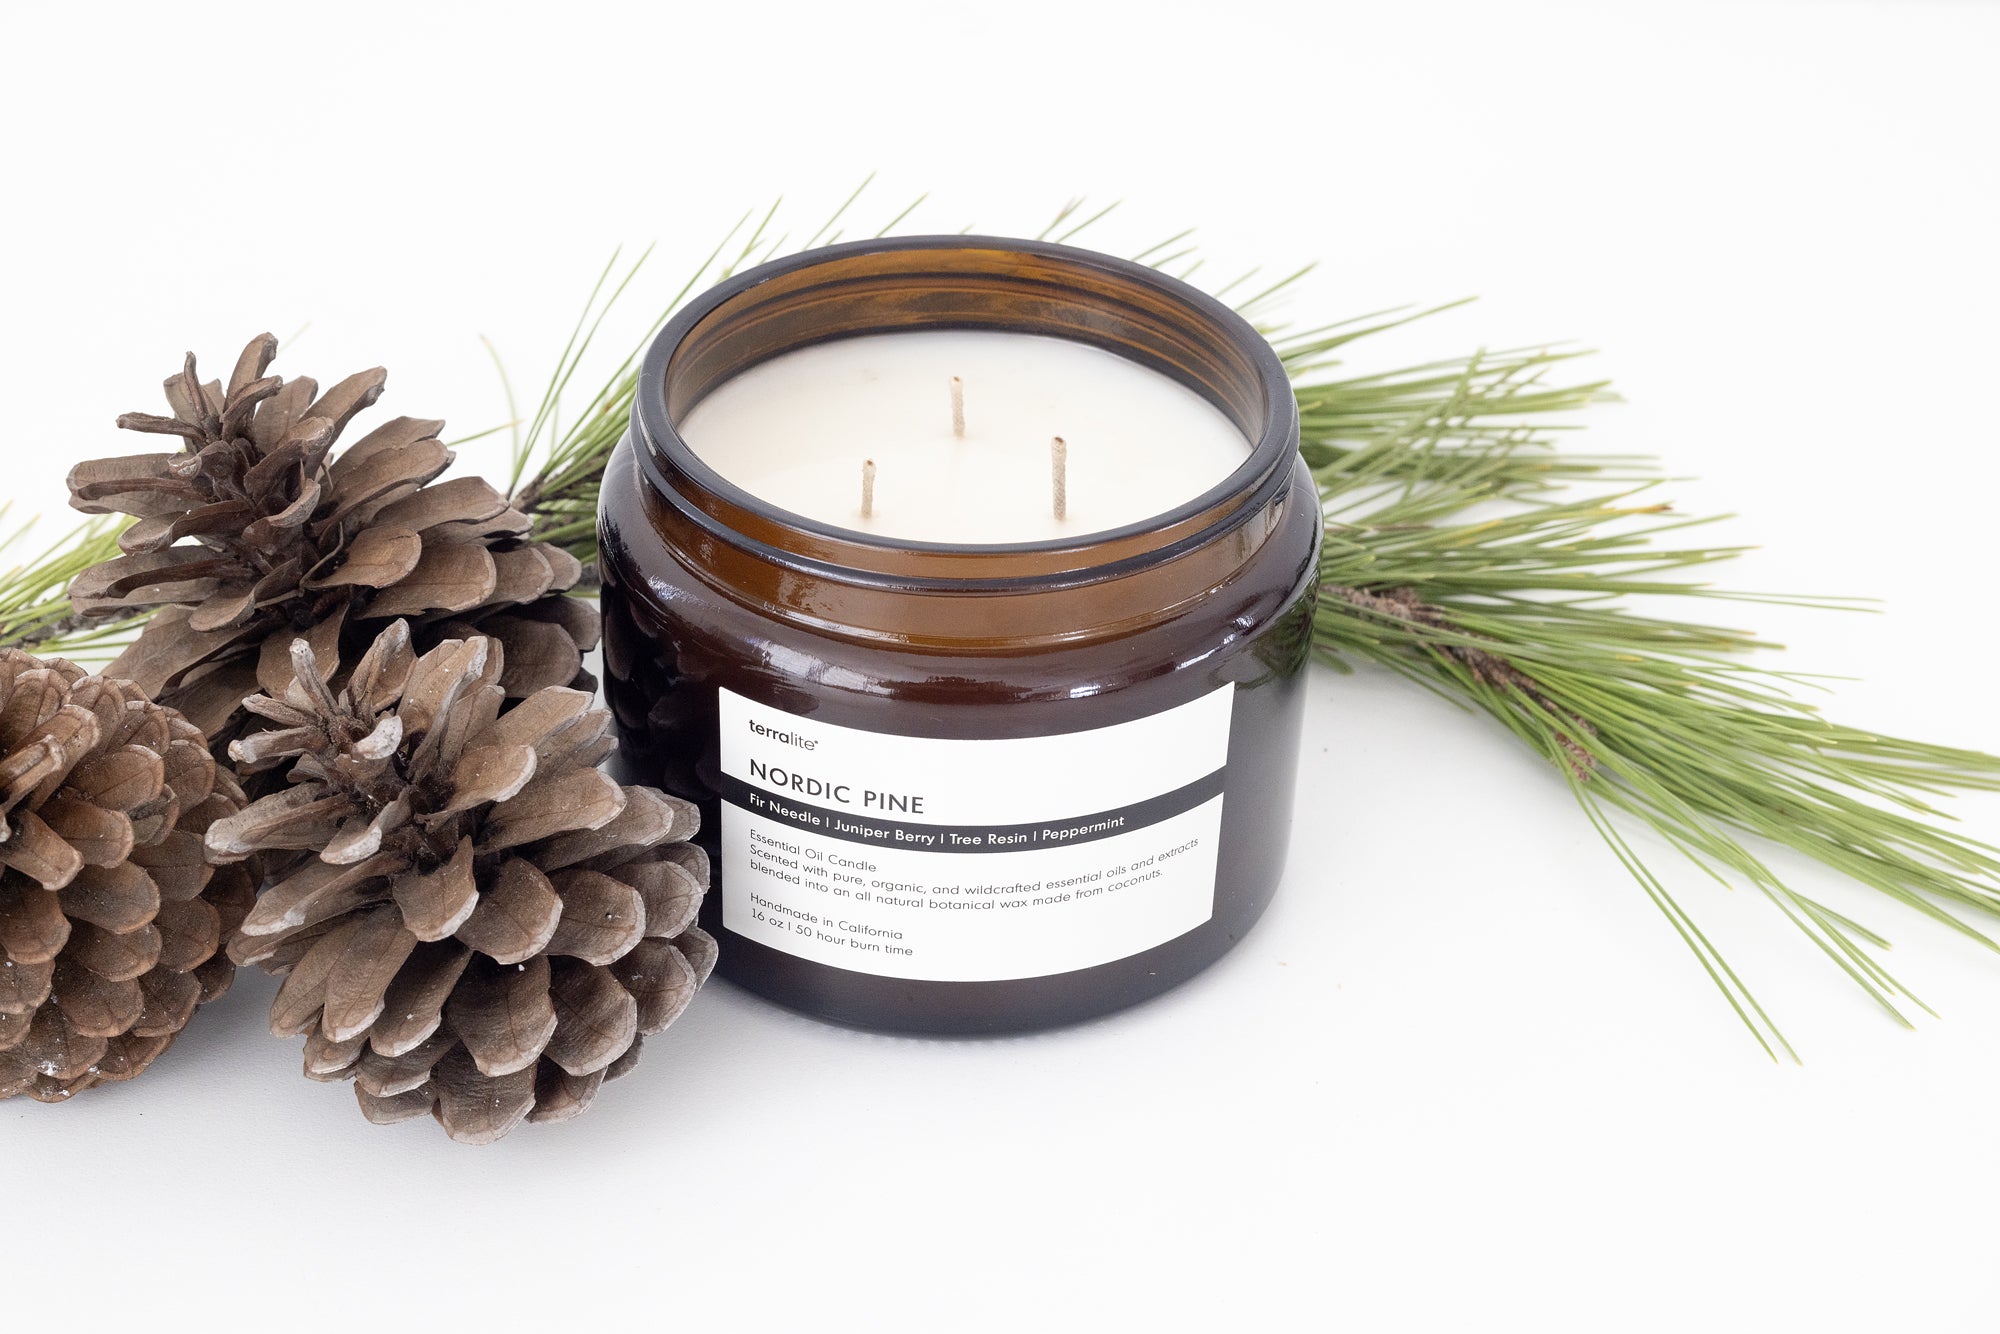 Nordic Pine Essential Oil Candle - 16 oz. made with Fir Needle, Juniper Berry, Tree Resin, and Organic Peppermint.